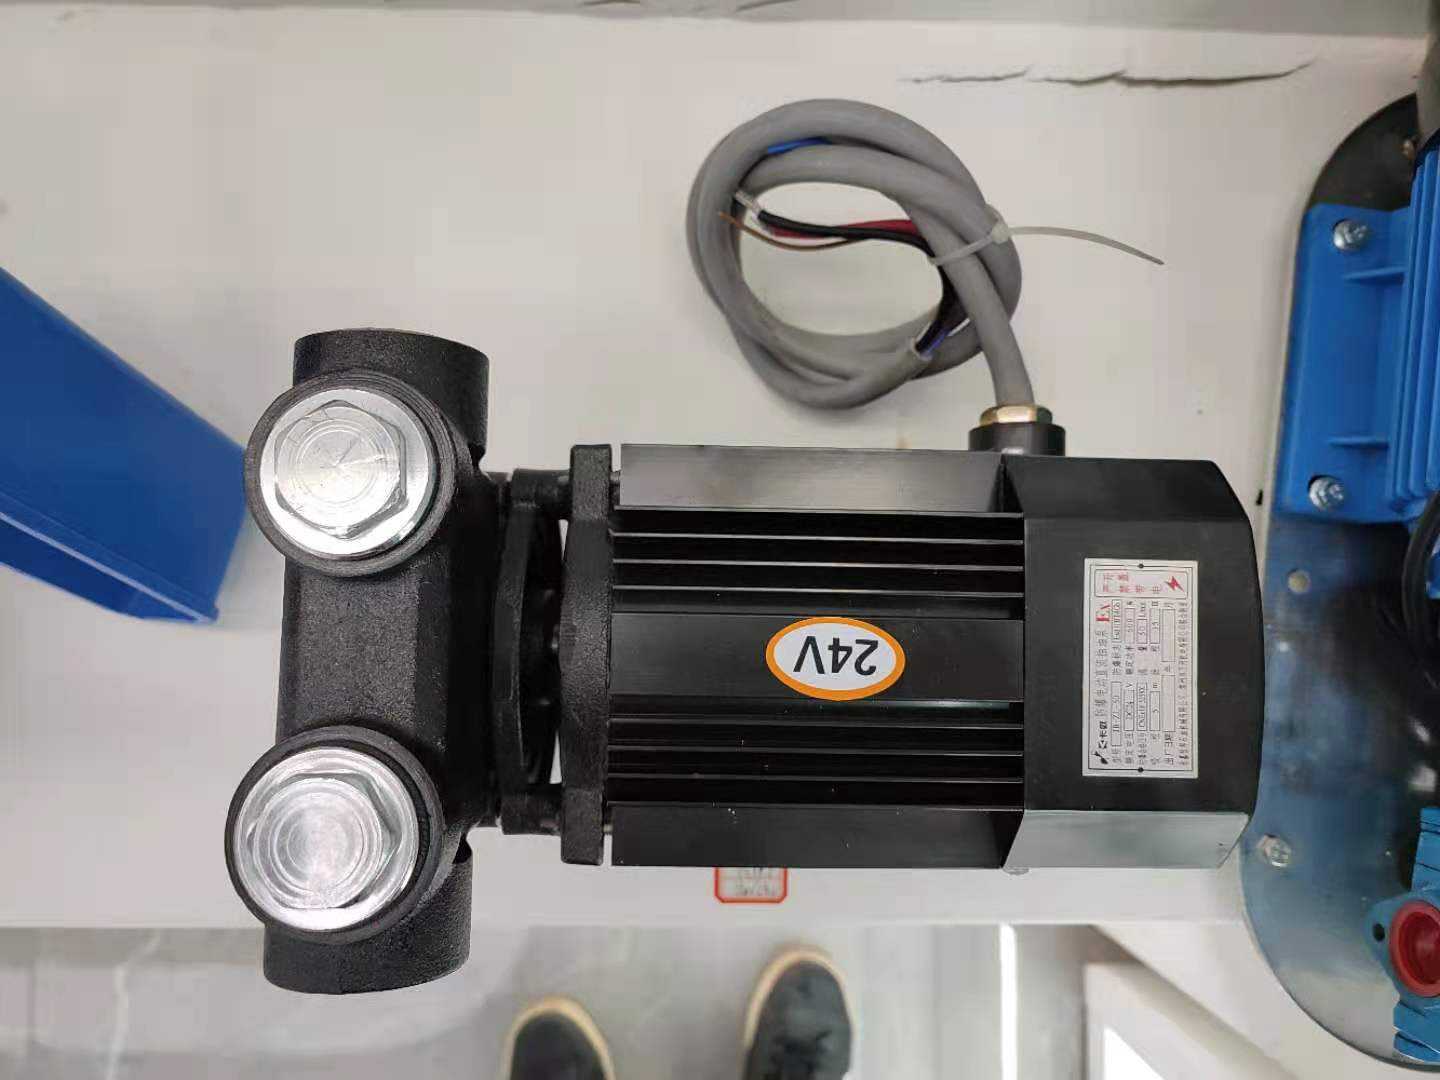 220V explosion-proof petrol diesel fuel pump with nozzle used as gas station dispenser